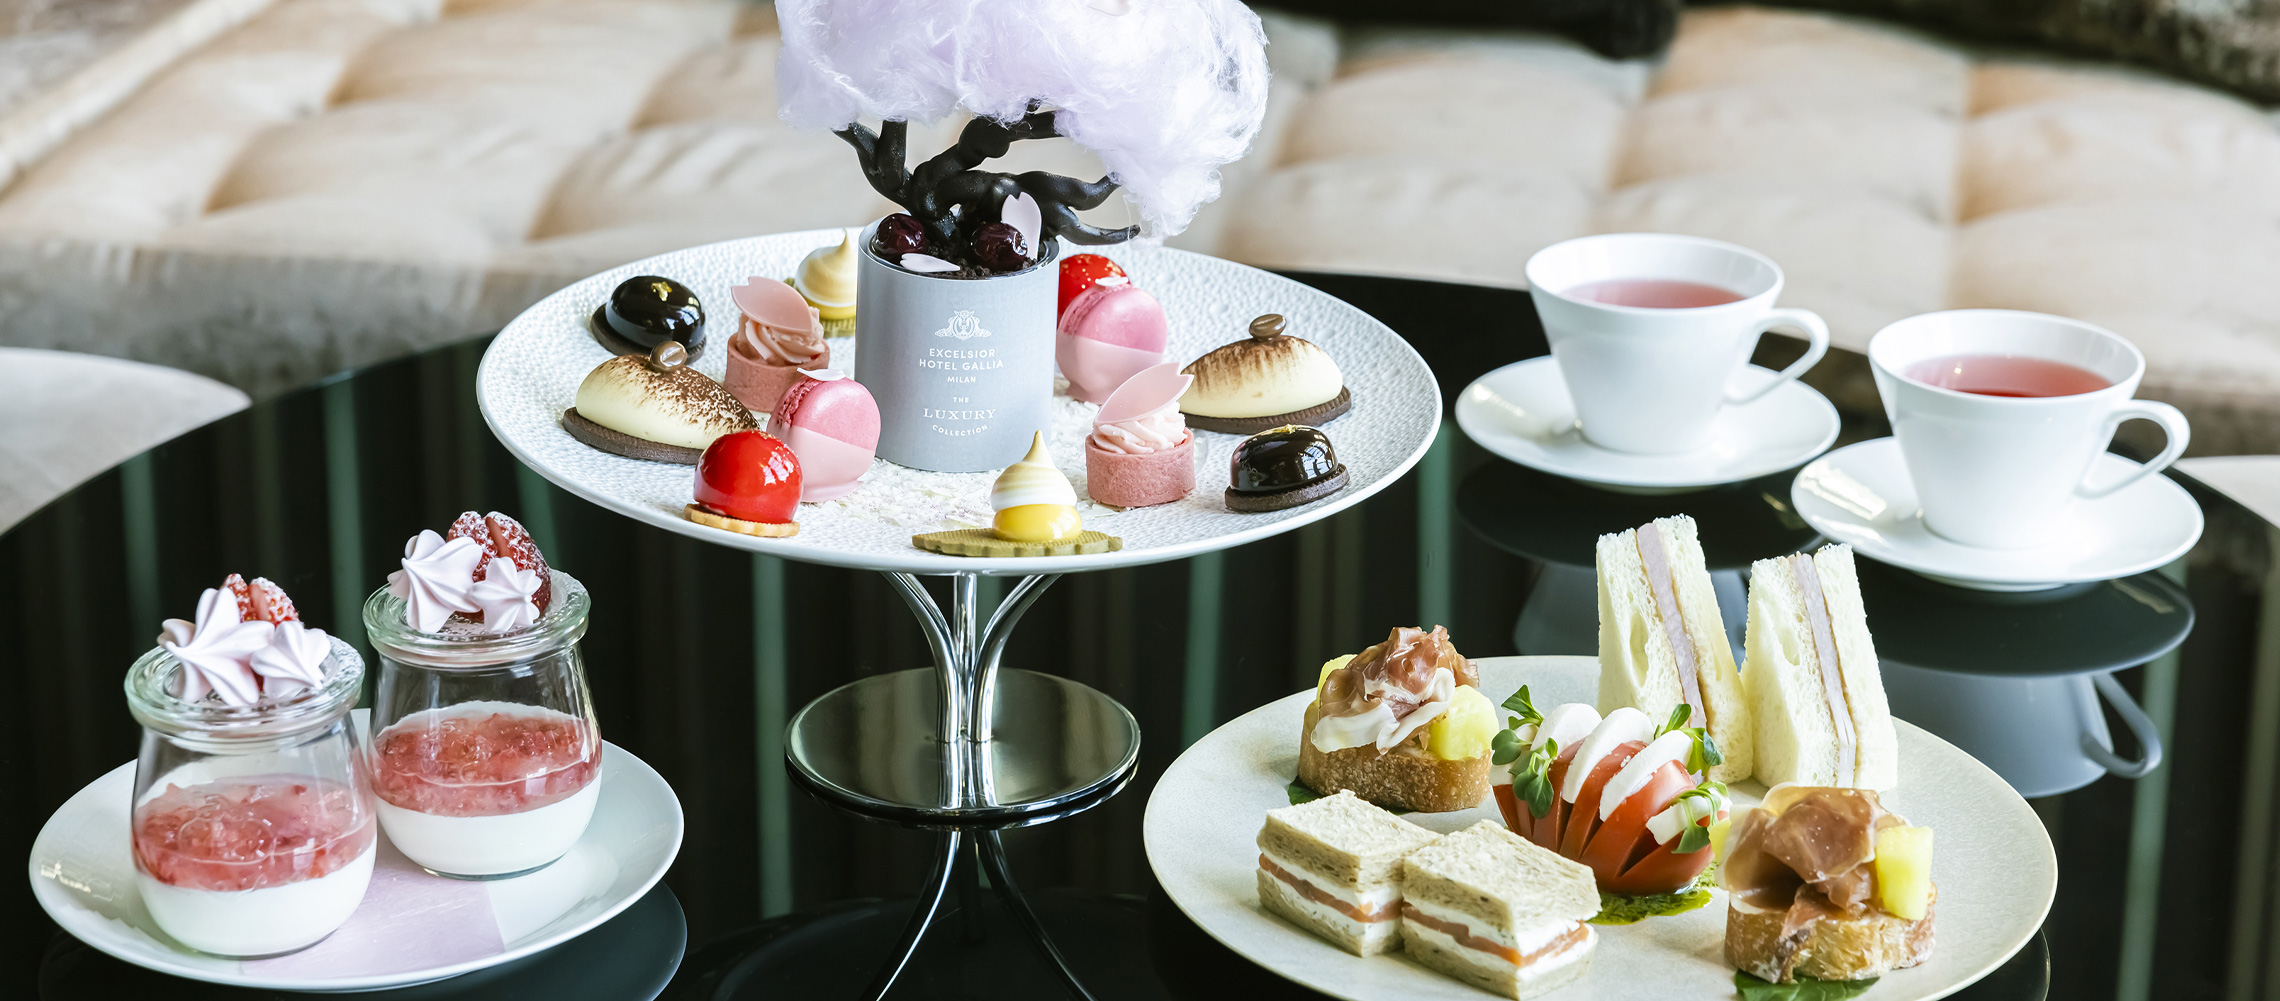 Sakura Afternoon Tea Inspired by Excelsior Hotel Gallia